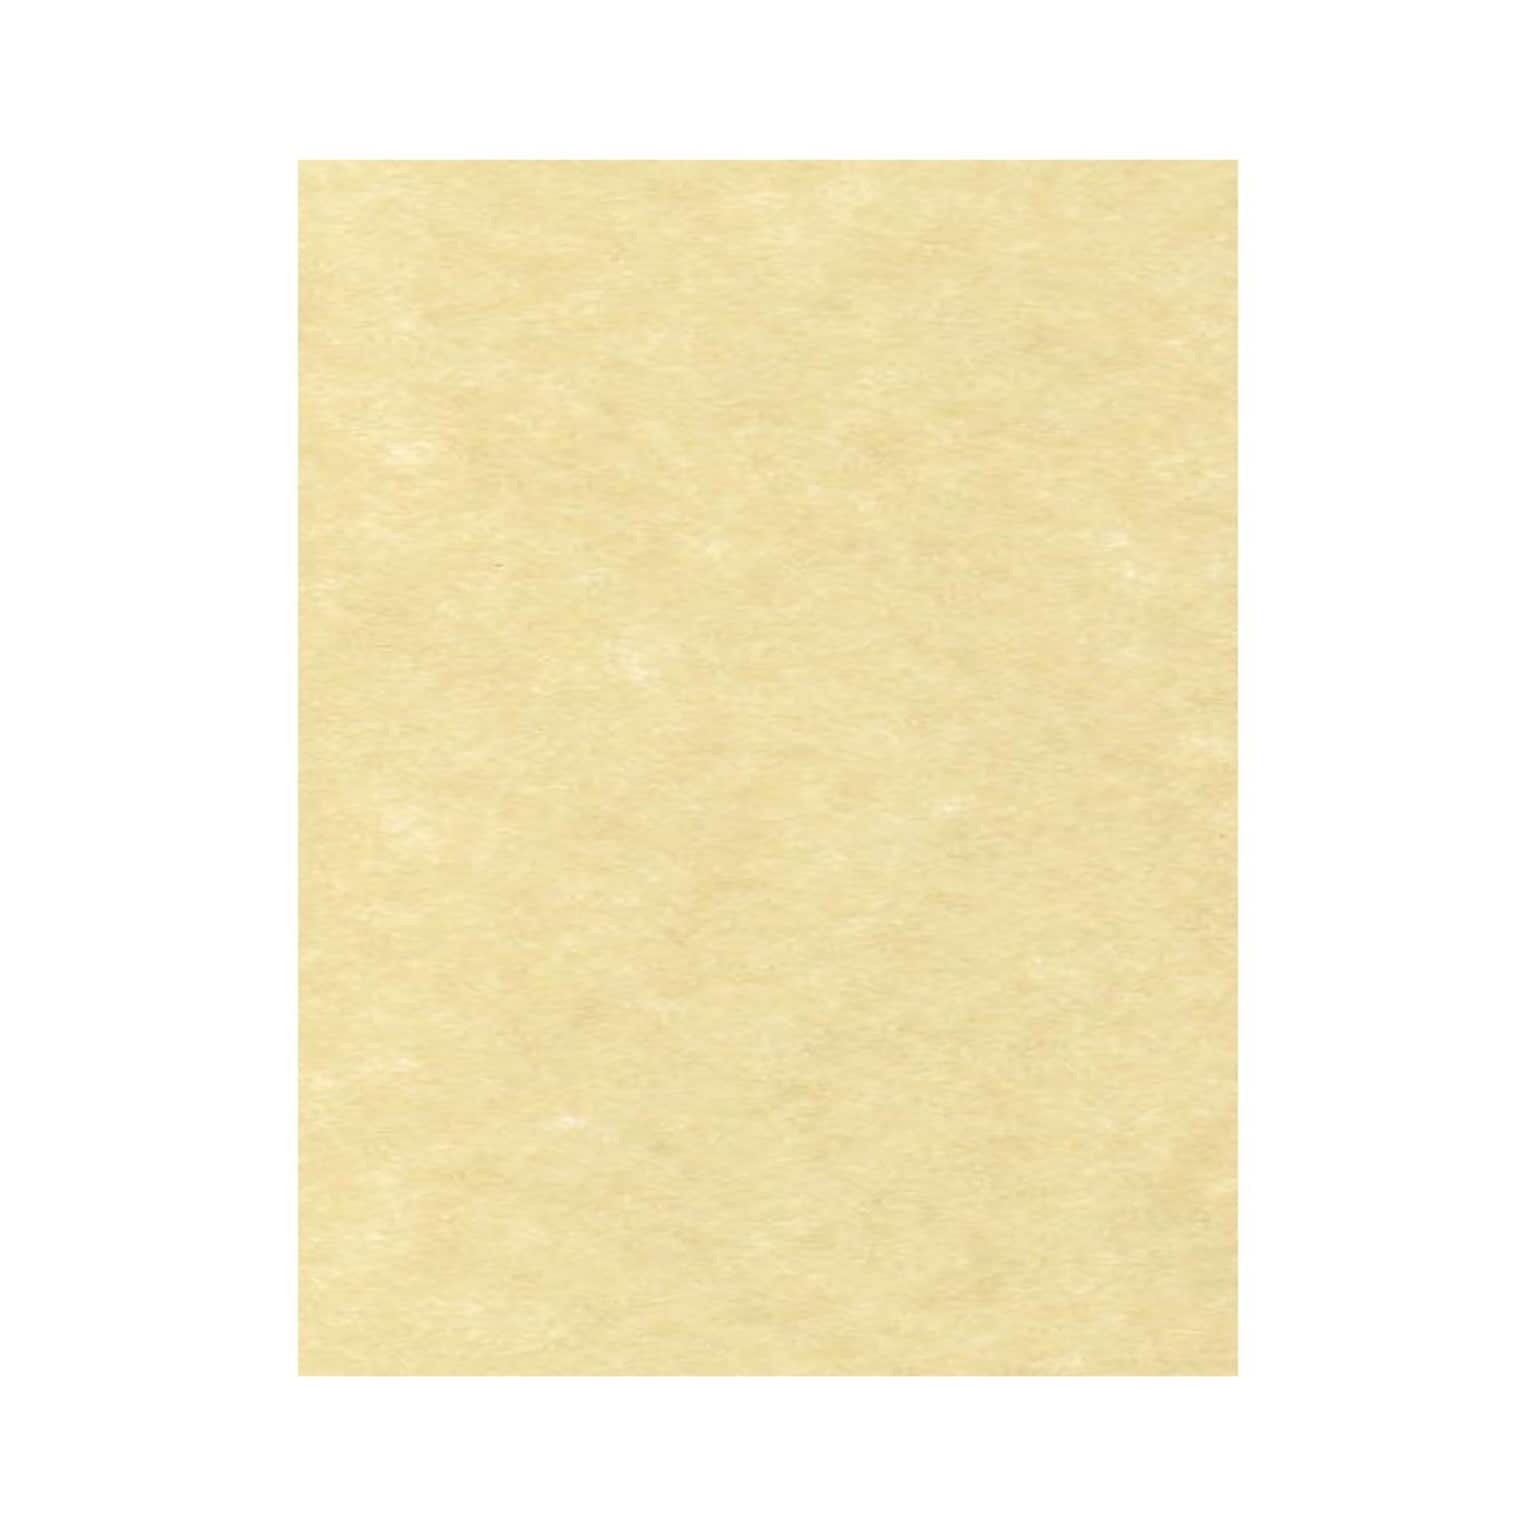 Lux Cardstock 8.5 x 11 inch, Gold Parchment 500/Pack